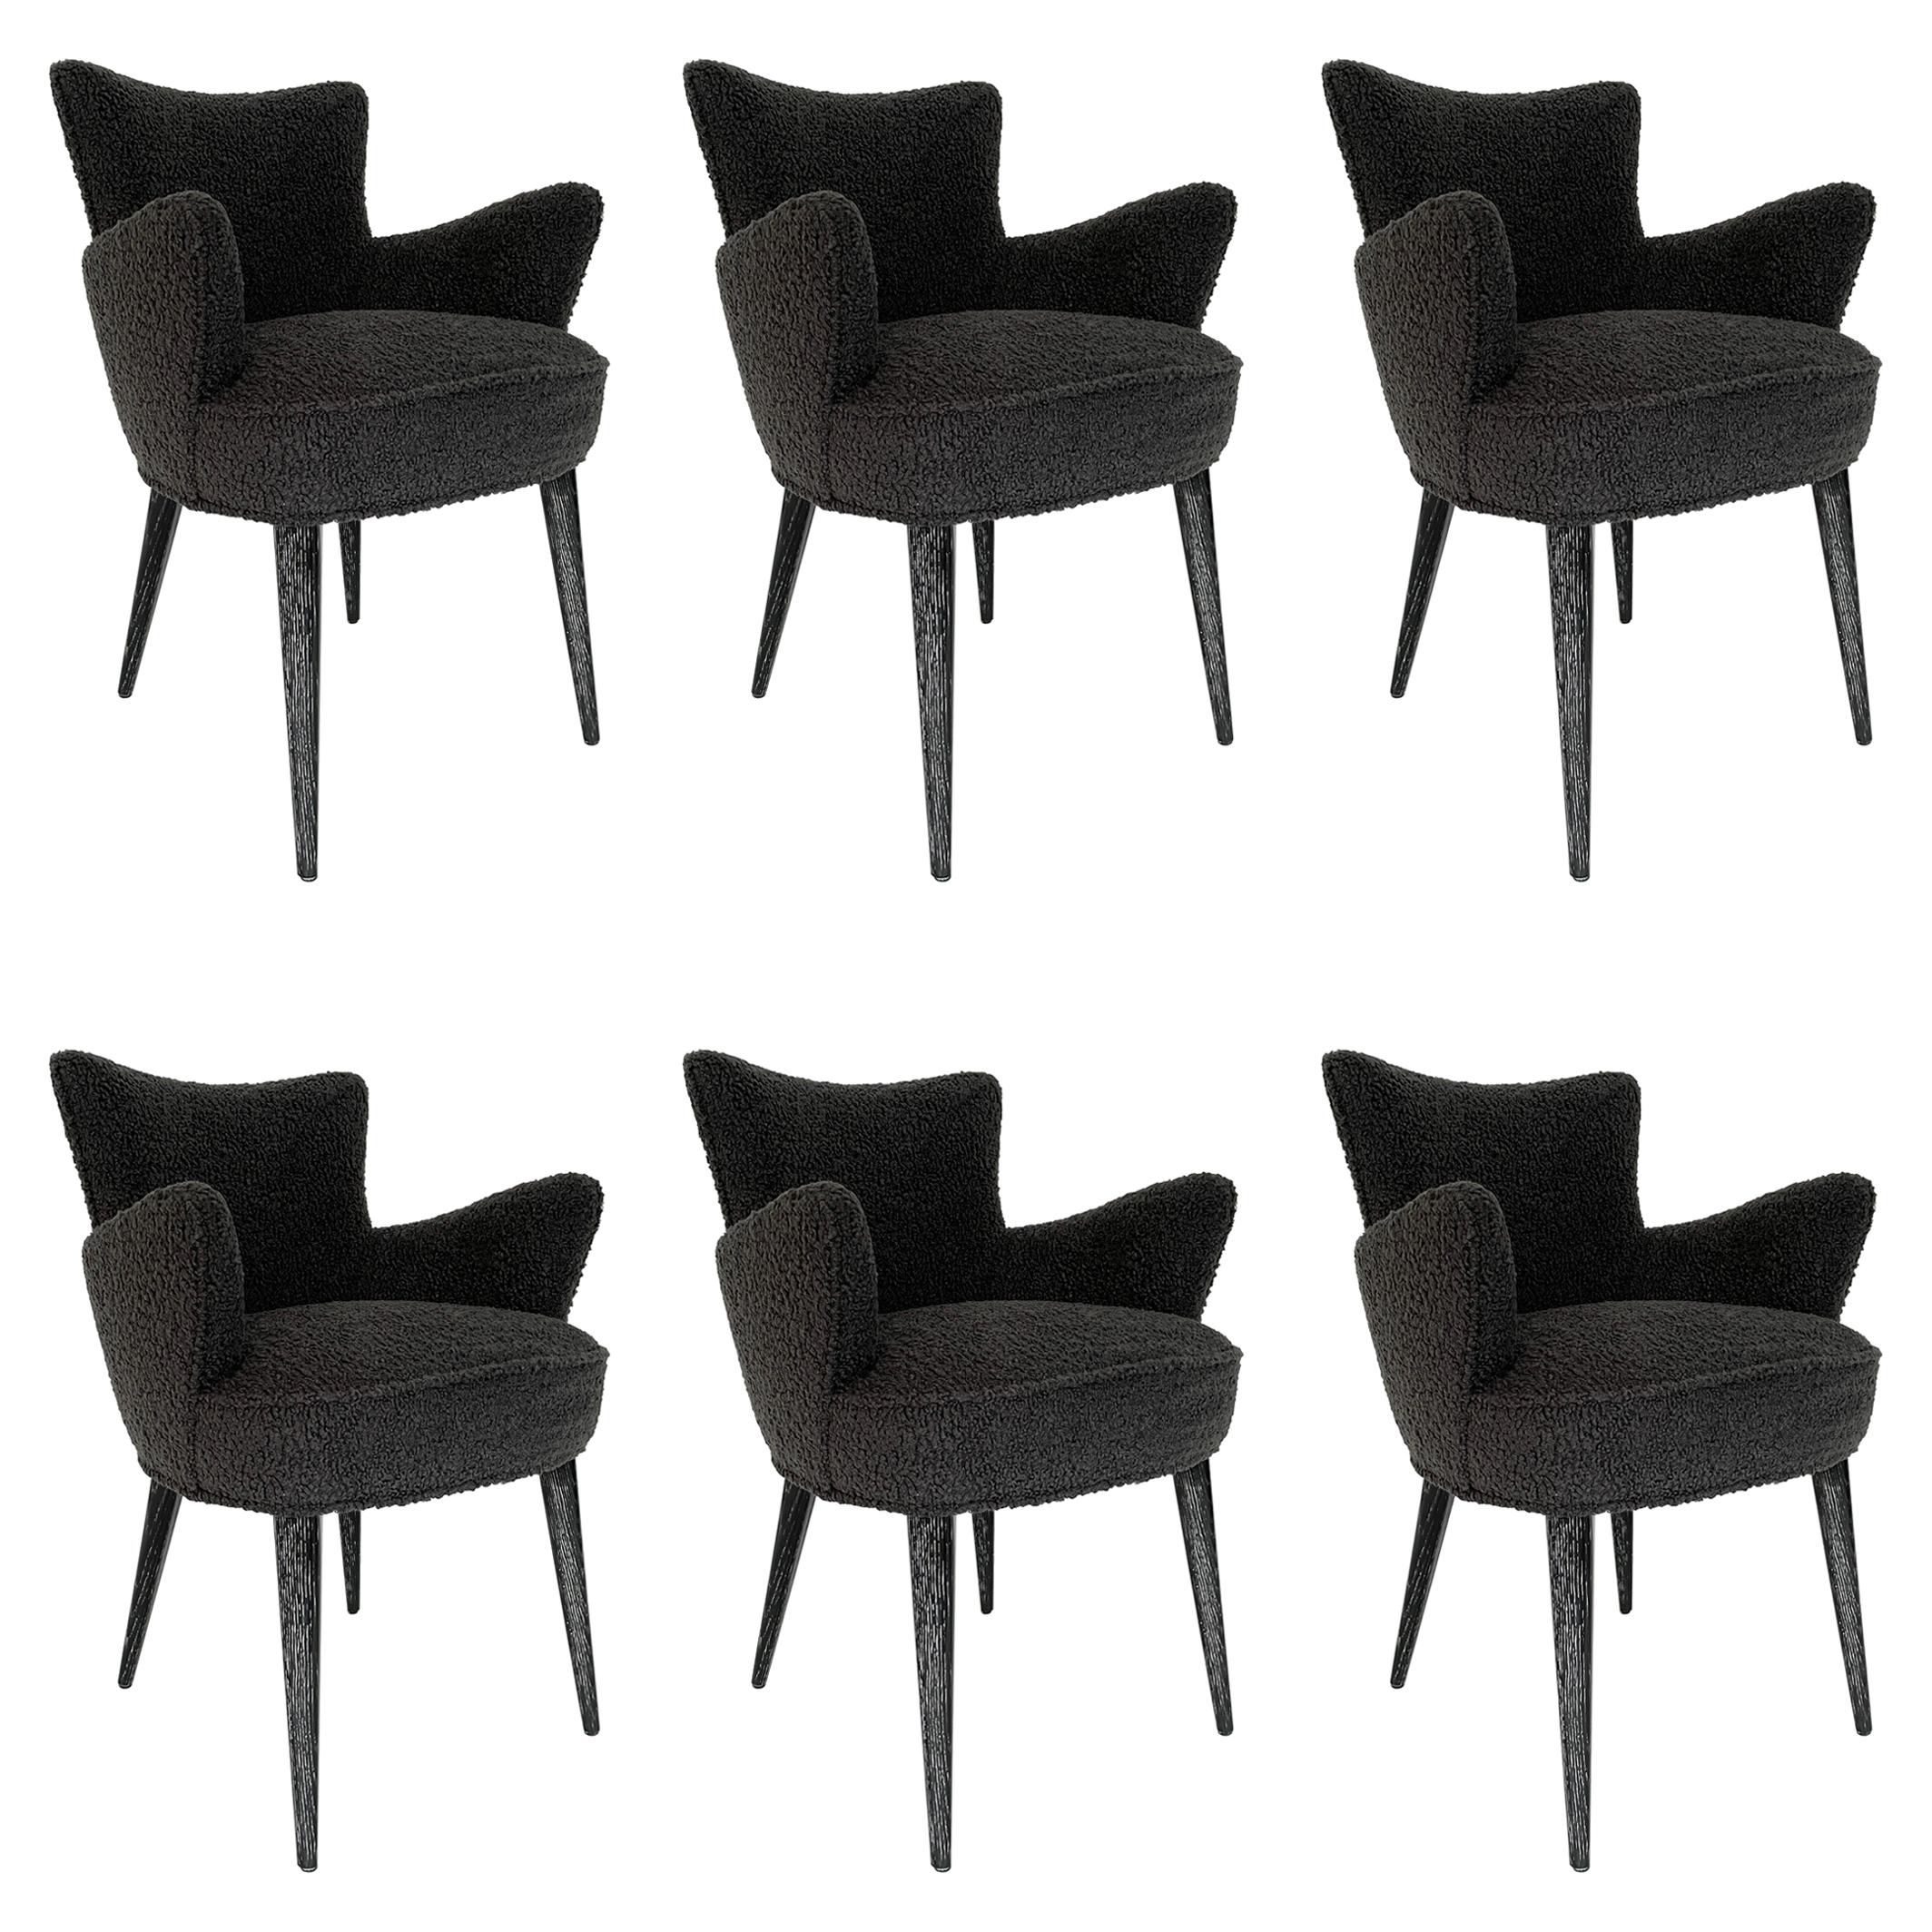 Set of 6 Aube Chairs, by Bourgeois Boheme Atelier